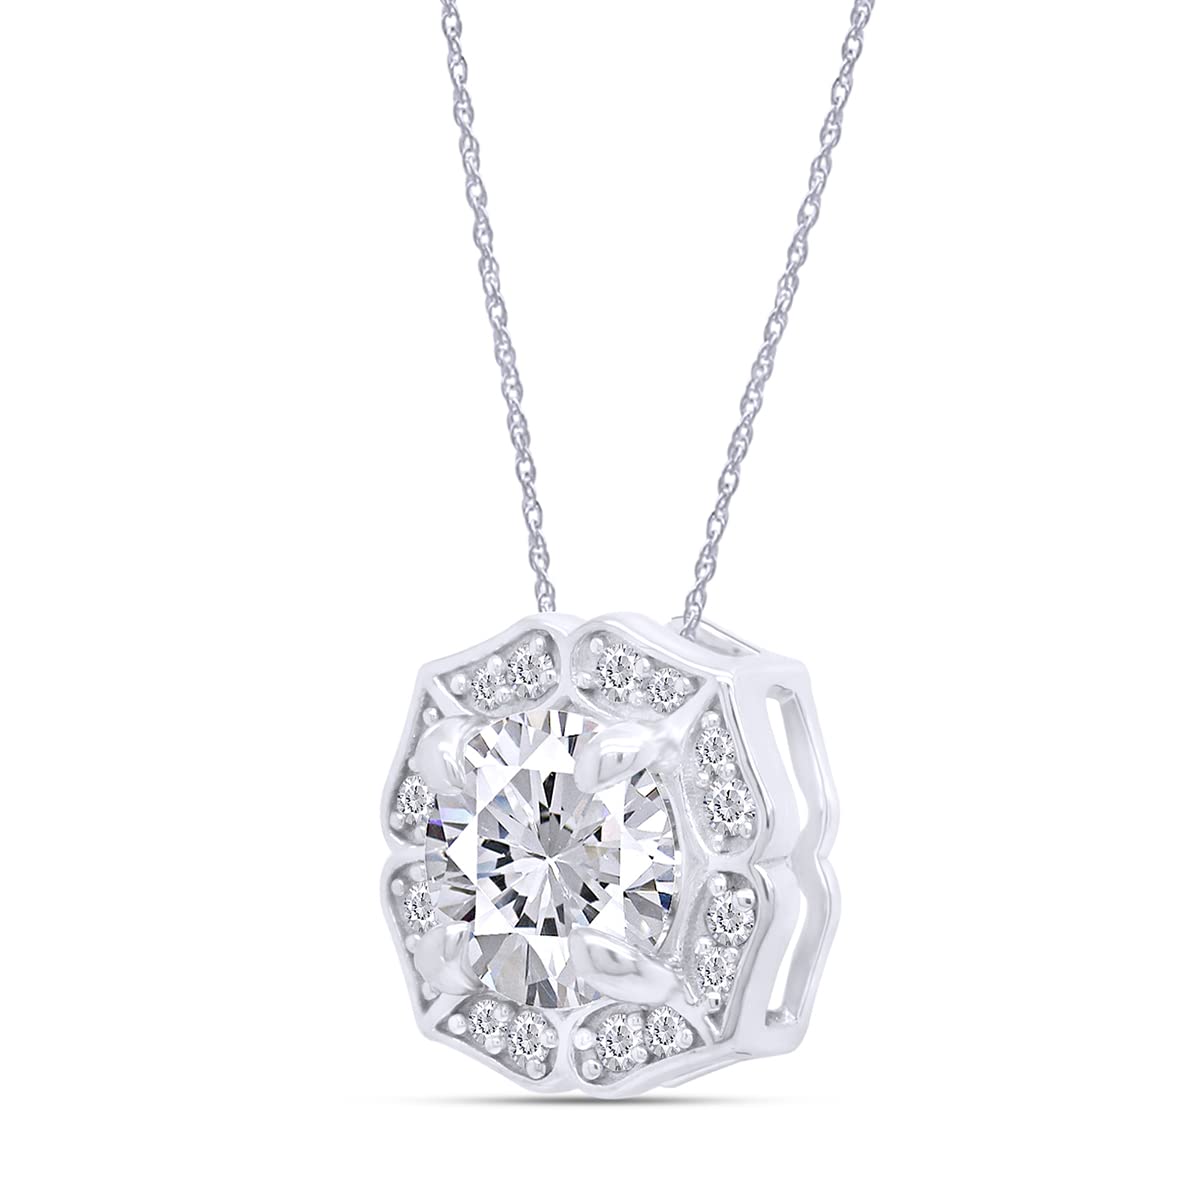 Load image into Gallery viewer, 1 1/3 Carat Lab Created Moissanite Diamond Floral Halo Drop Pendant Necklace In 925 Sterling Silver (1.33 Cttw)
